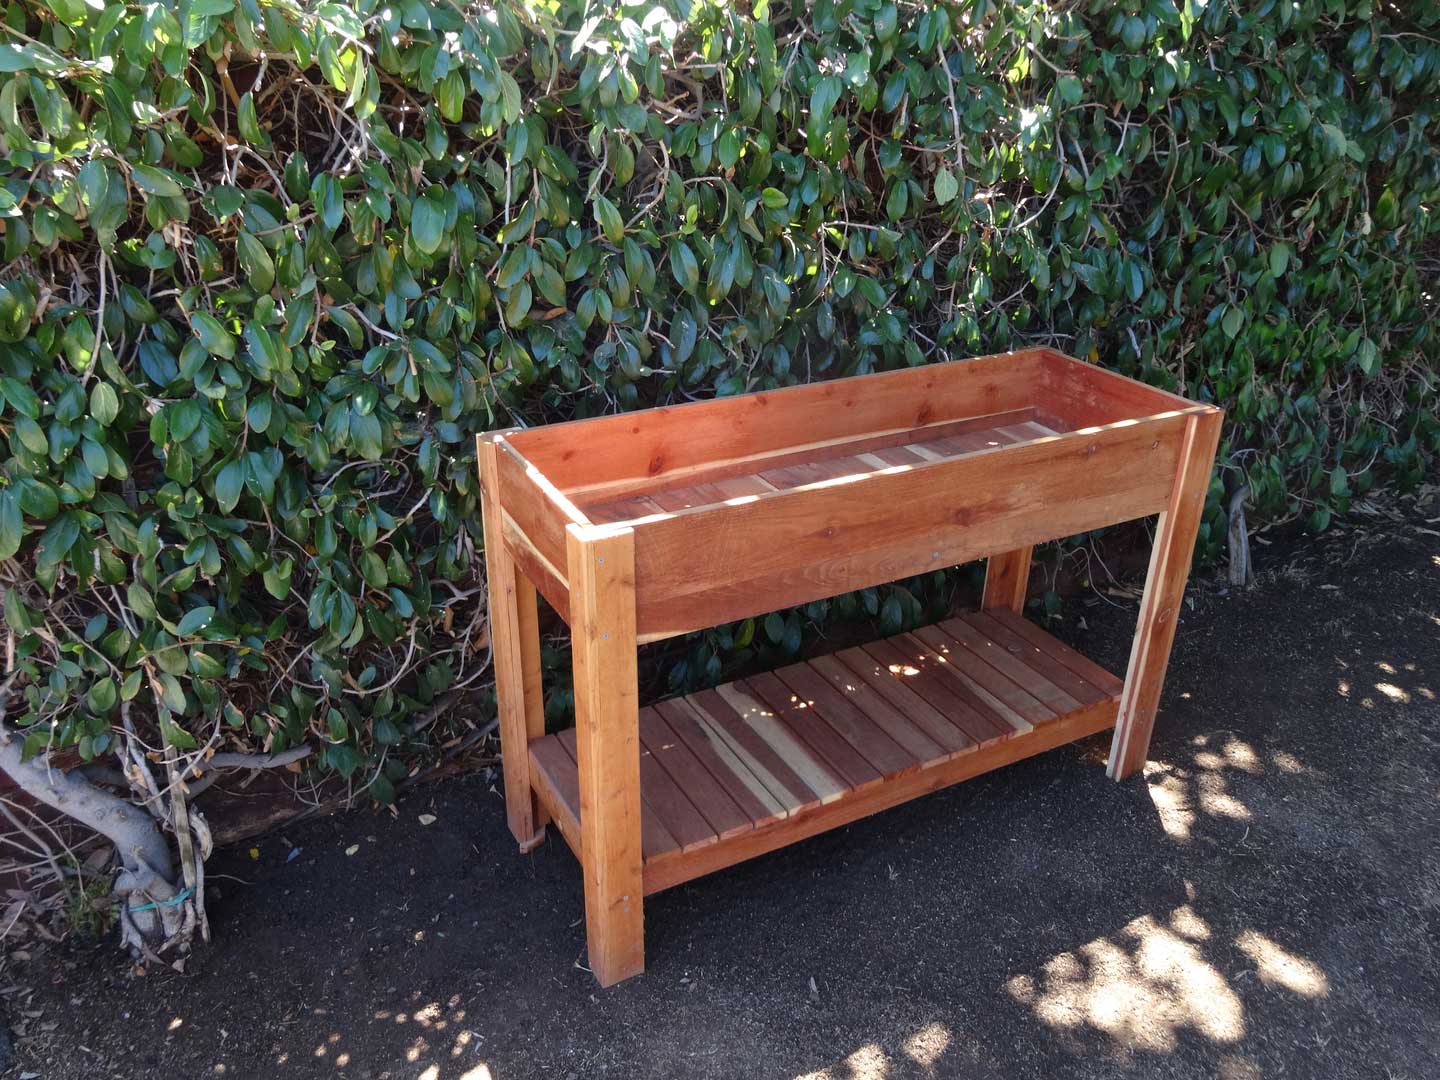 A wooden planter box sitting on top of a cement ground.